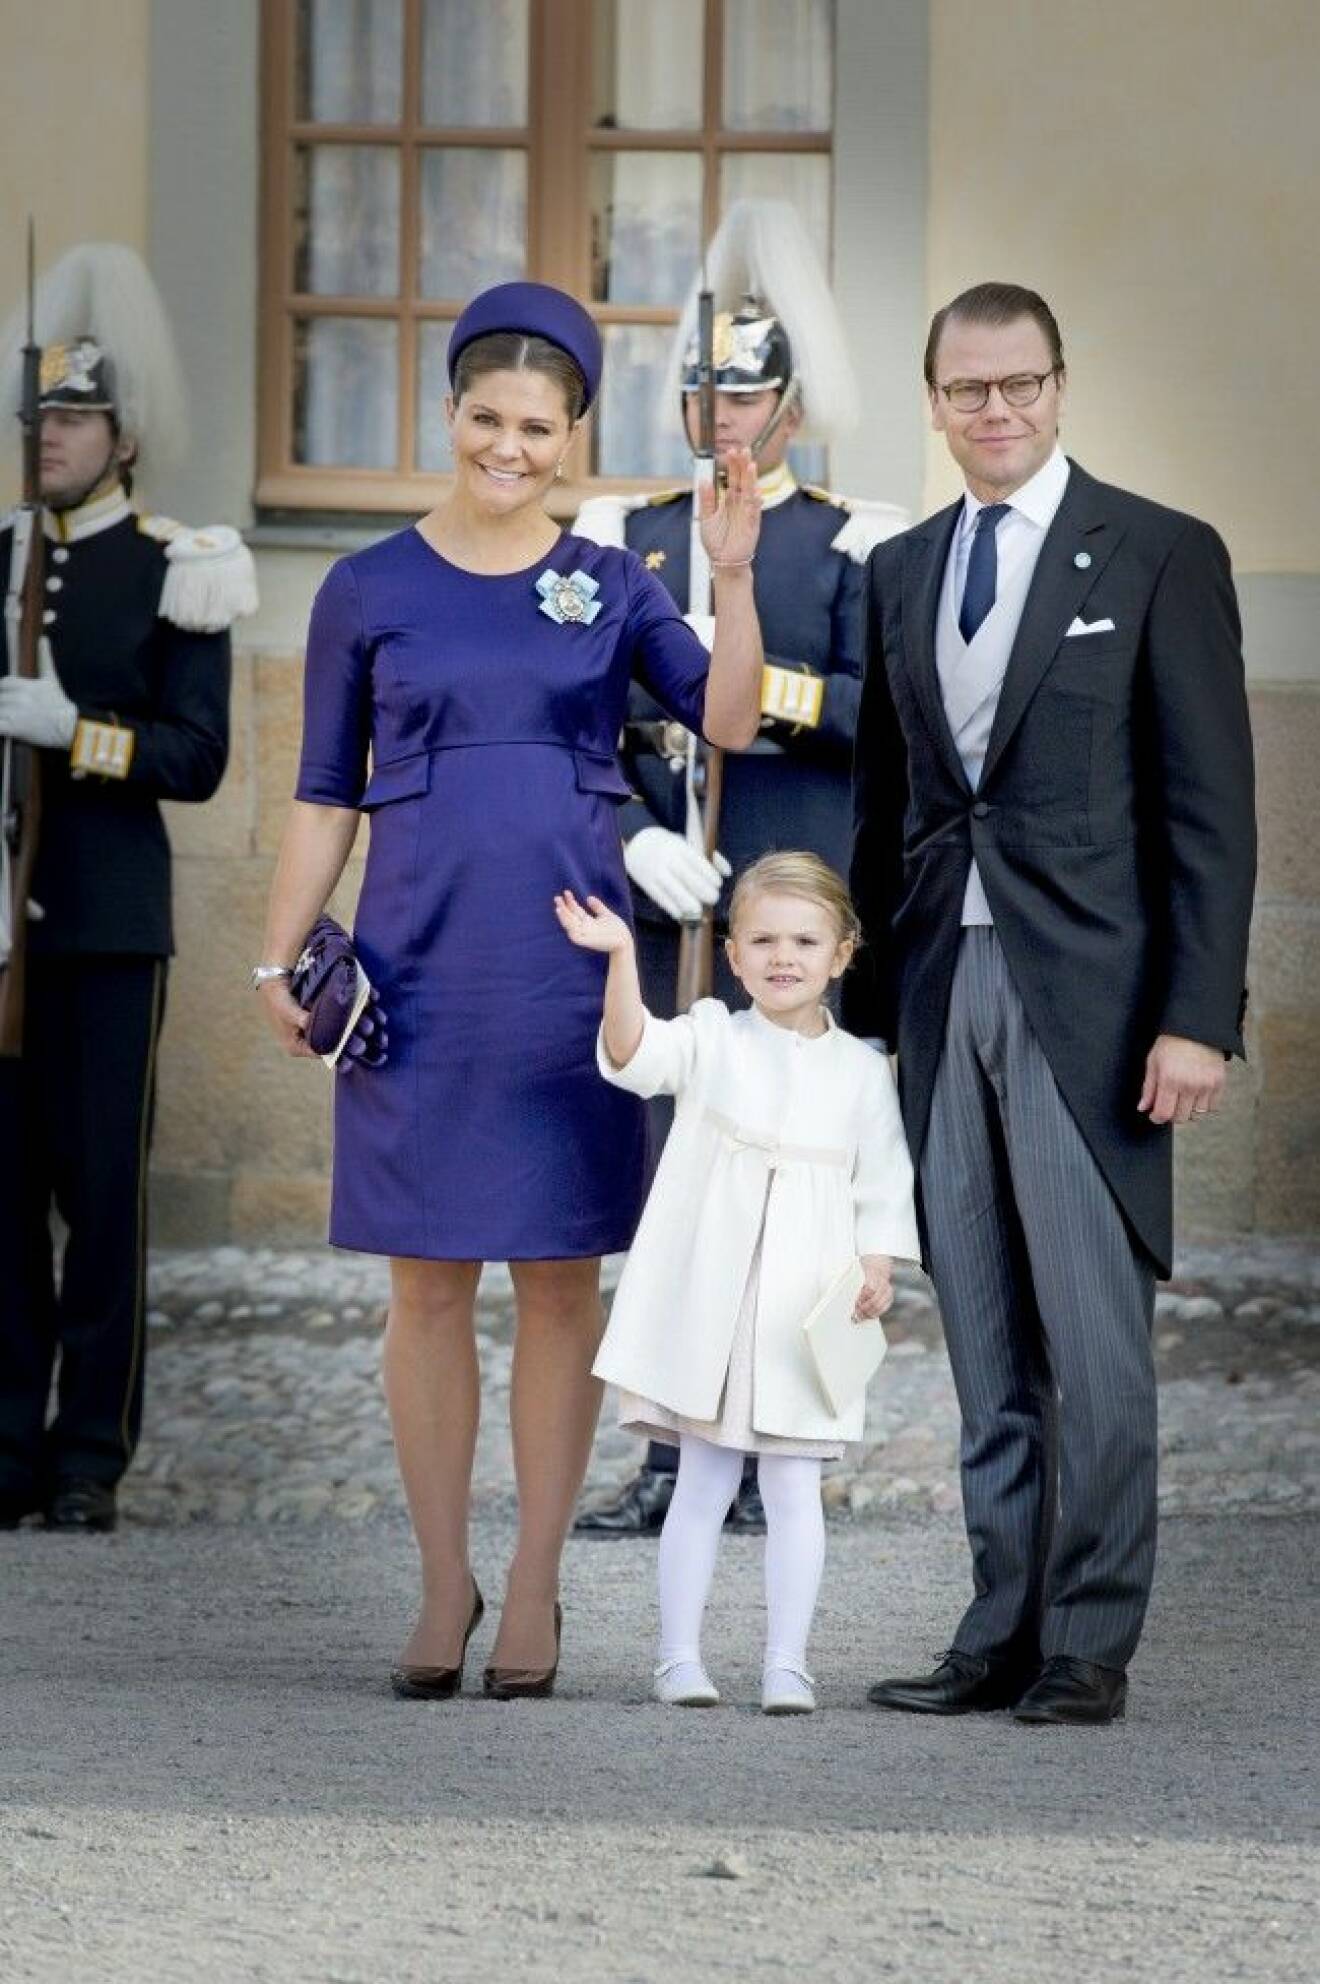 11-10-2015 STOCKHOLM BORGHOLM Princess Madeleine of Sweden and her husband Chris O?Neill after the christening of Prince Nicolas . Princess Madeleine of Sweden and her husband Chris O'Neill will have their newborn son Prince Nicolas baptised on Sunday 11 October.Nicolas will be christened in the royal chapel of Drottningholm Palace, located on the outskirts of Stockholm. It is the same place where his big sister Princess Leonore, who is now 18 months old, was also baptised last year. princess victoria and prince daniel and princess estelle Queen Silvia and King Carl XVI Gustaf of Sweden Princess Sofia and Prince Carl Philip COPYRIGHT ROBIN UTRECHT 2015/11/10 STOCKHOLM BORGHOLM na de doop van prins Nicolas. Prinses Madeleine van Zweden en haar man Chris O'Neill zal hebben hun pasgeboren zoon Prince Nicolas gedoopt op zondag 11 October.Nicolas zal worden gedoopt in de koninklijke kapel van Drottningholm Paleis, gelegen aan de rand van Stockholm. Het is dezelfde plaats waar zijn grote zus prinses Leonore, die nu 18 maanden oud, werd ook gedoopt vorig jaar. COPYRIGHT ROBIN UTRECHT prinses Victoria en Daniel Westling en prinses estelle Koningin Silvia en koning Carl XVI Gustaf van Zweden Princess Sofia en prins Carl Philip All Over Press